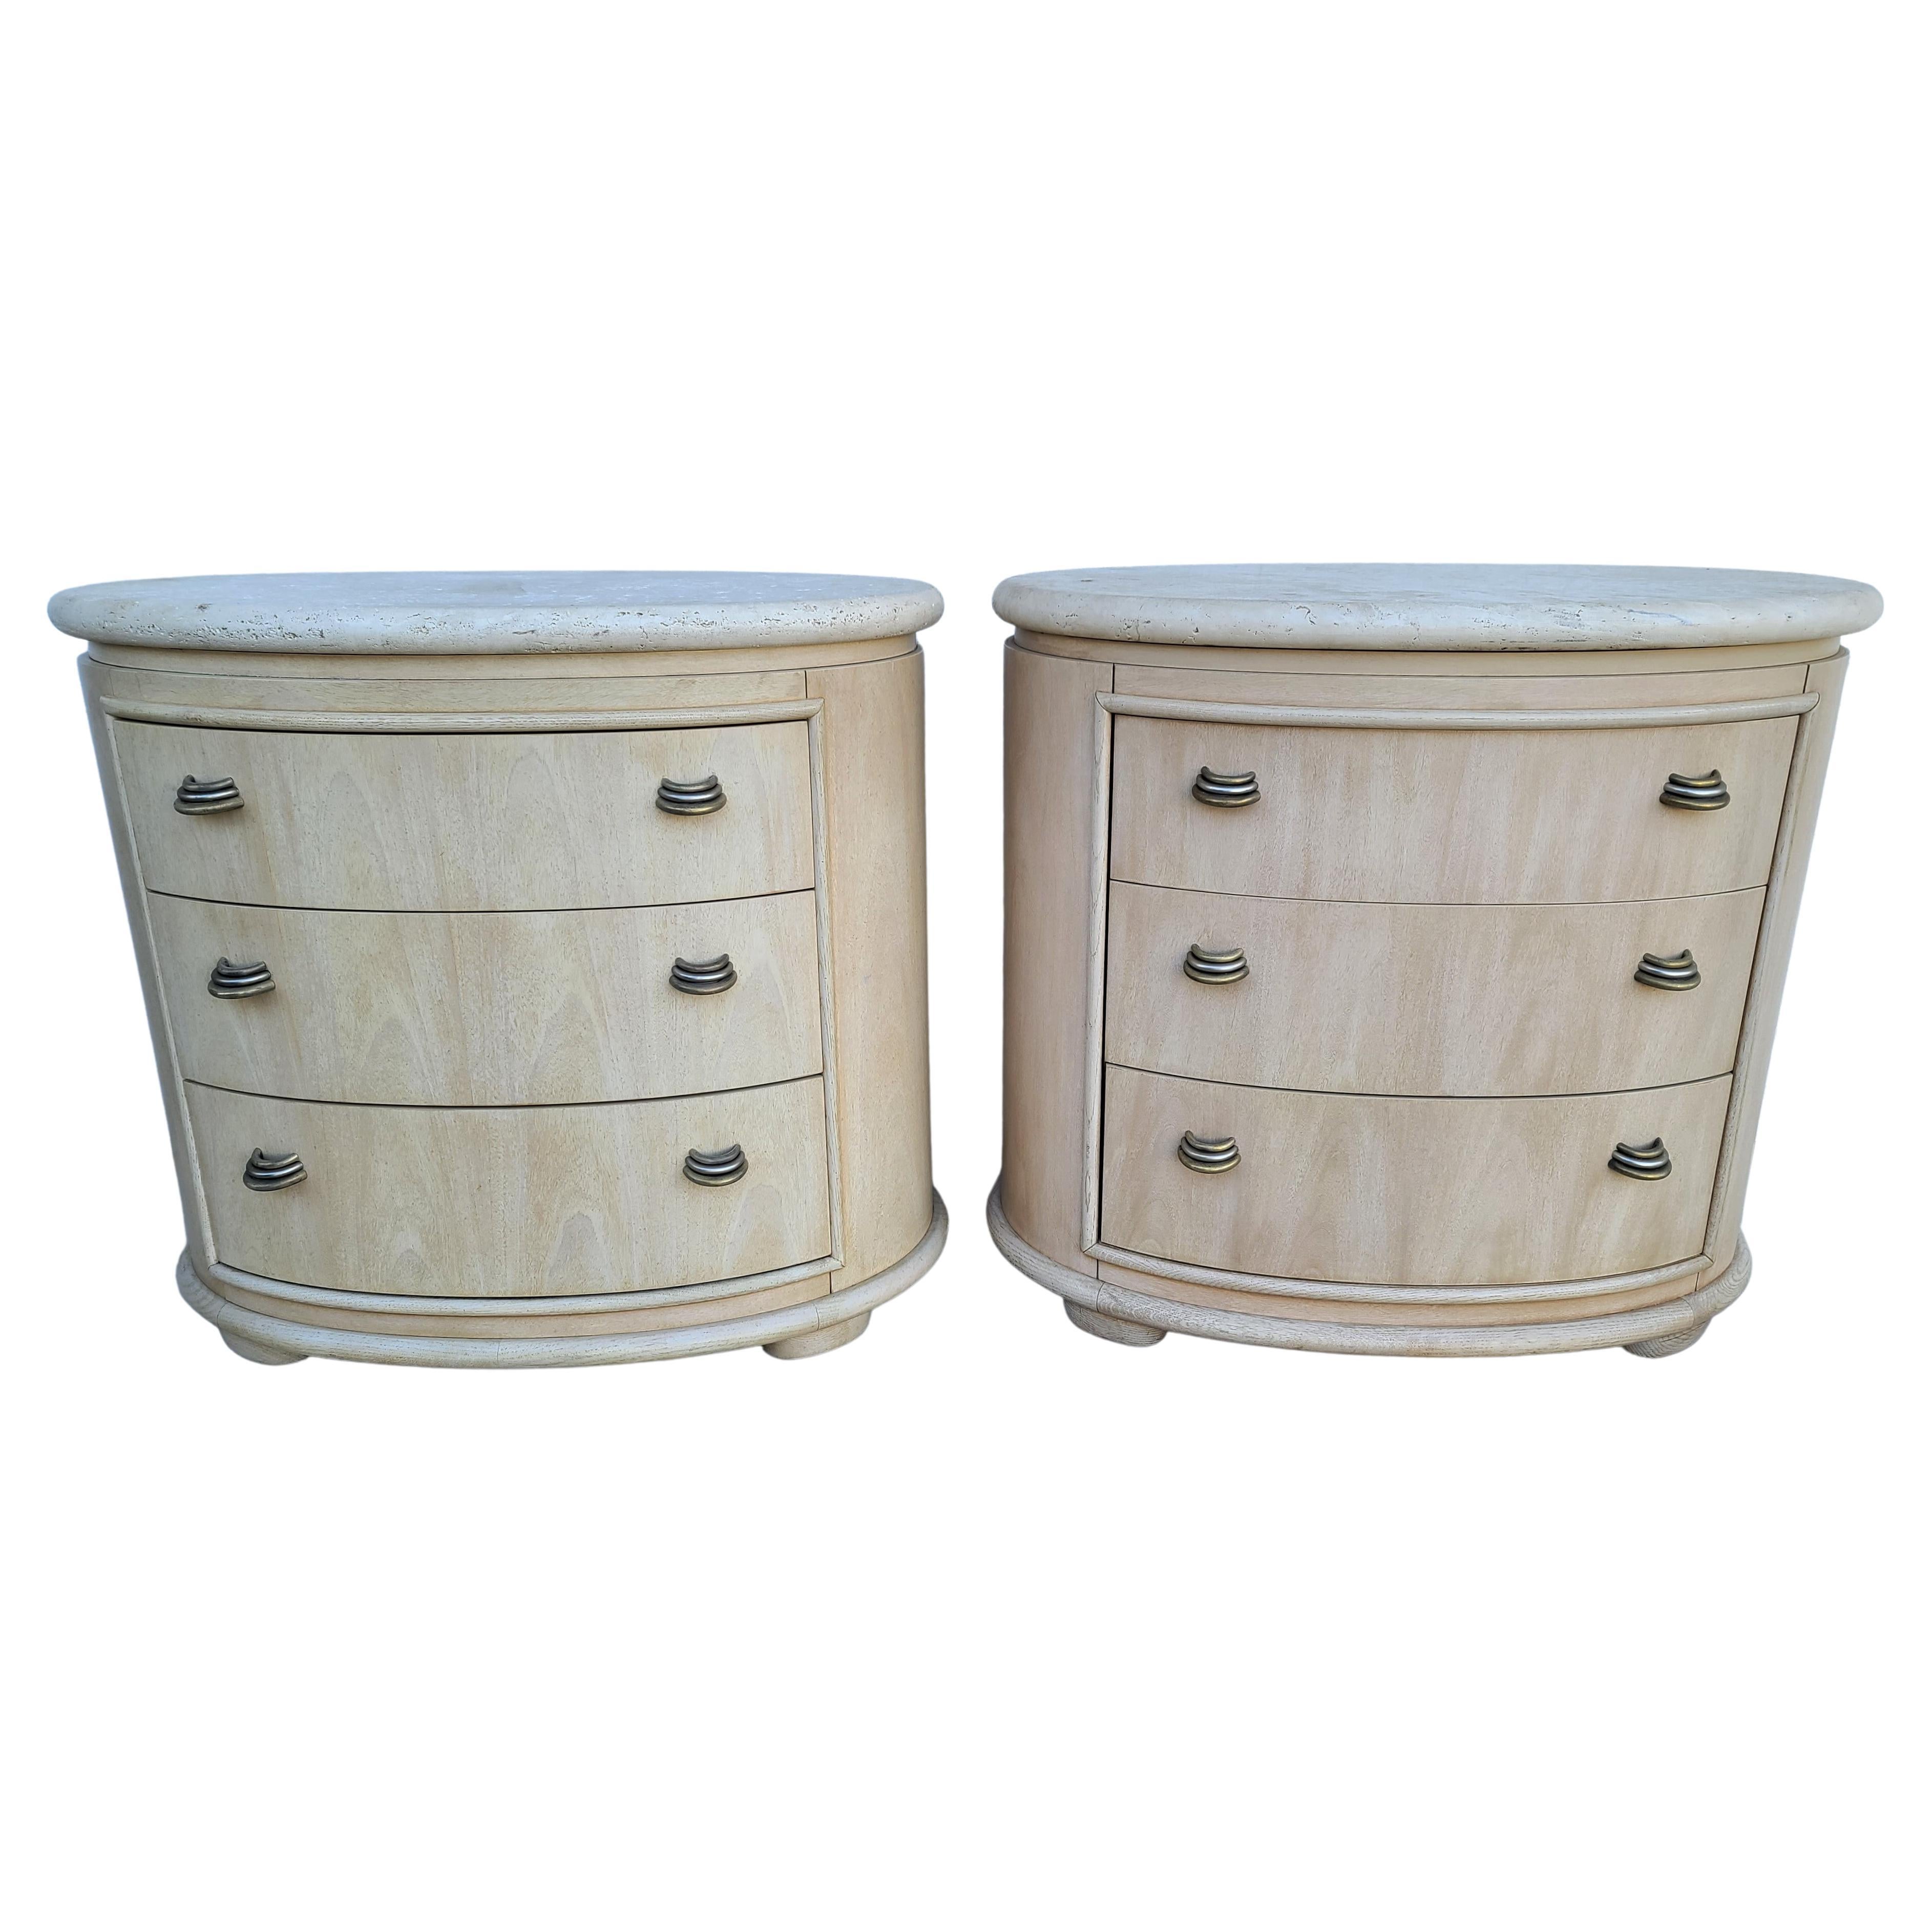 Henredon Contemporary Pickled Wood King Stone Top Nightstands Tables, a Pair